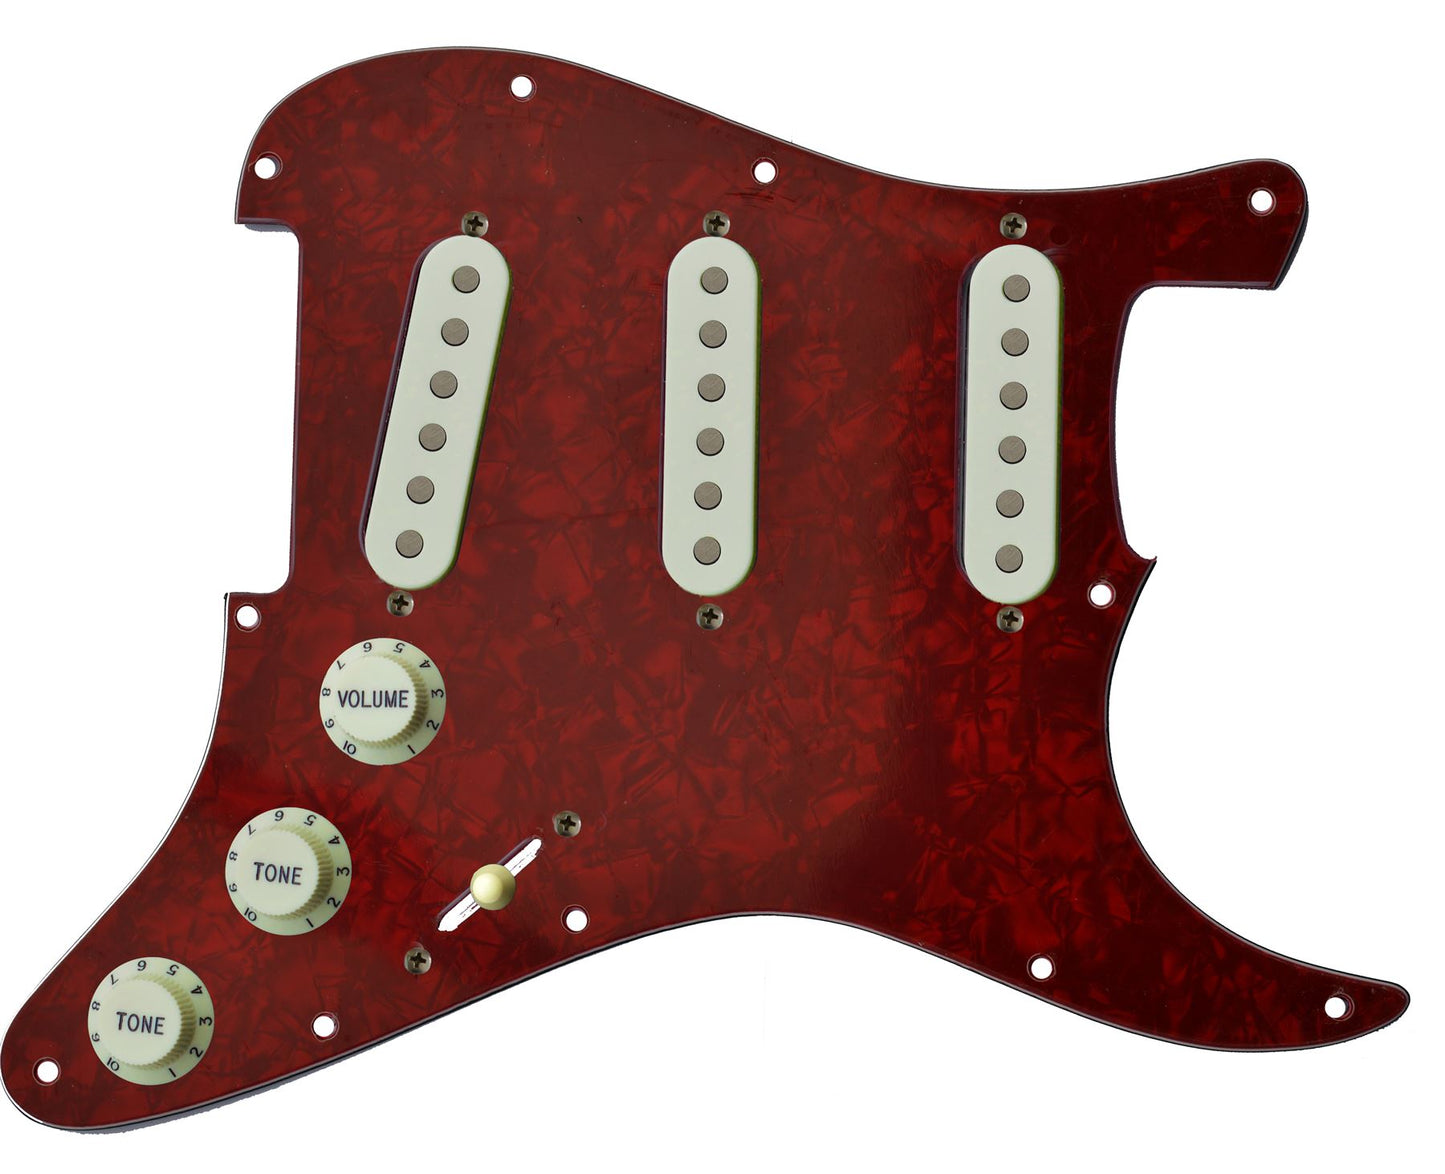 Deluxe Tonerider Alnico II Blues Fully Loaded Stratocaster Scratchplate